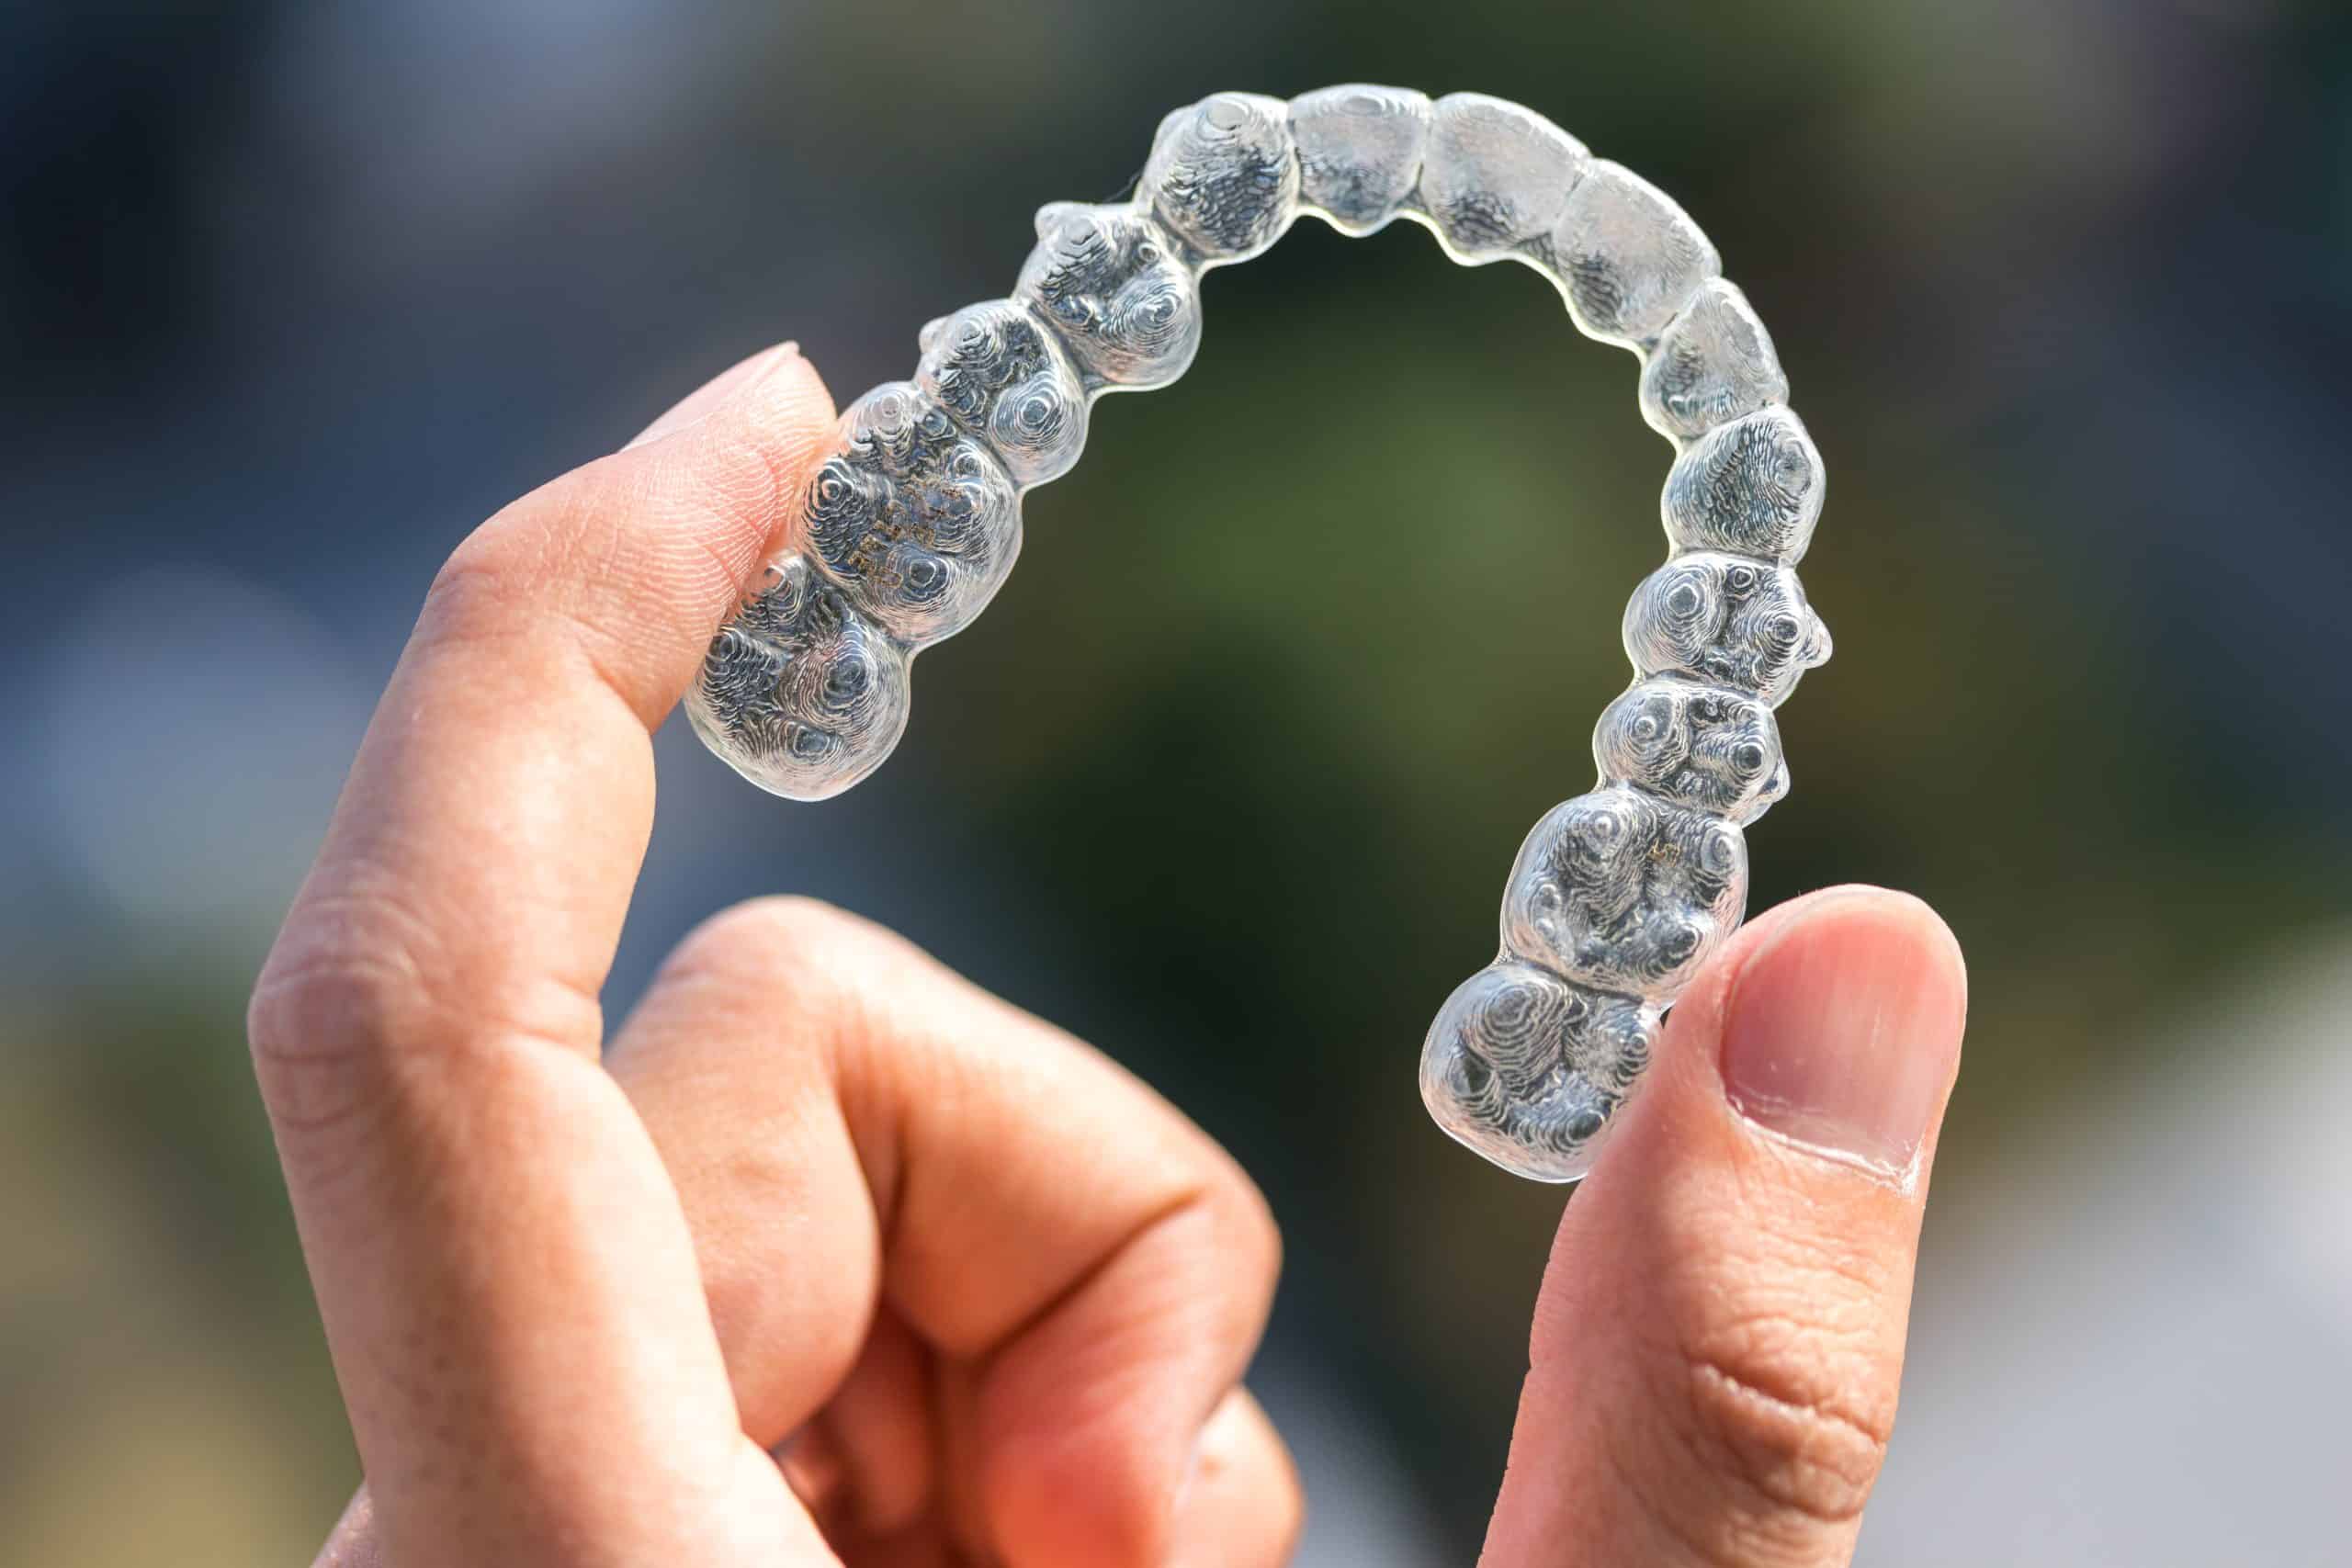 Correct Your Smile With Invisalign Braces in Waco, TX